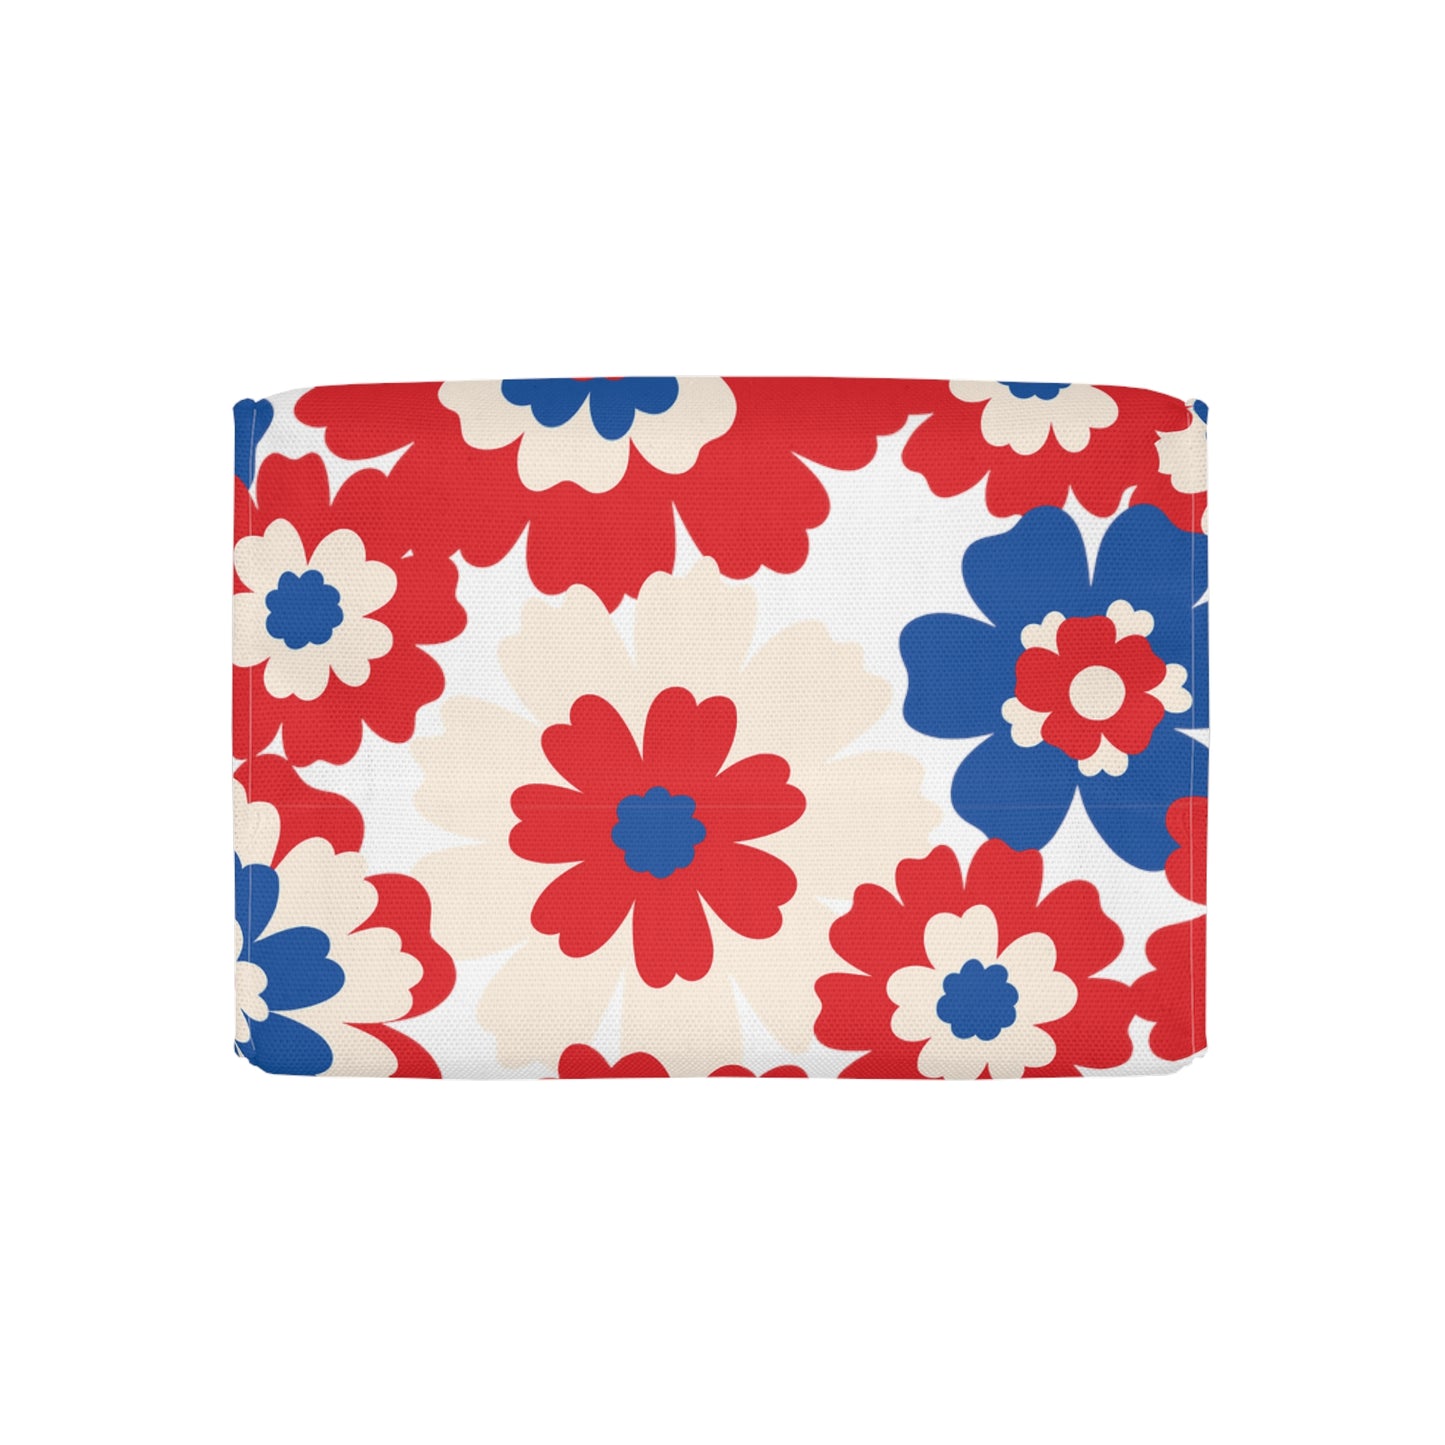 Patriotic Lunch Bag / Insulated Lunch Bag